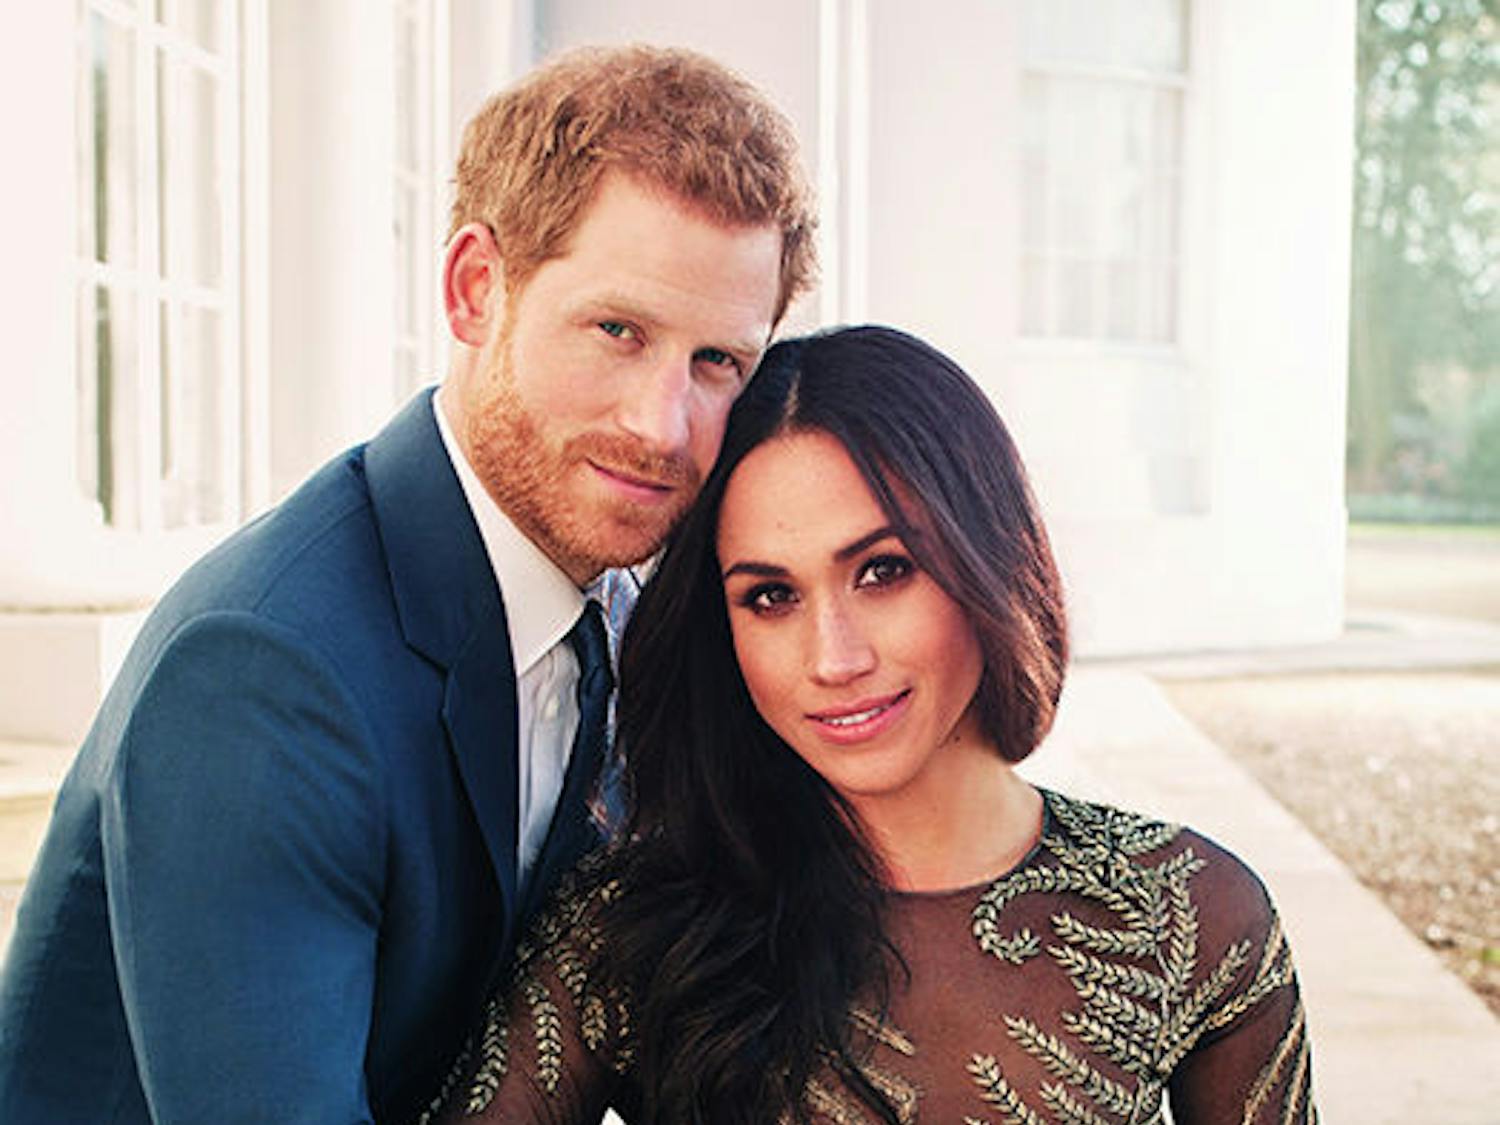 Prince Harry and Meghan Markle pose for an official engagement photo at Frogmore House, in Windsor, England.